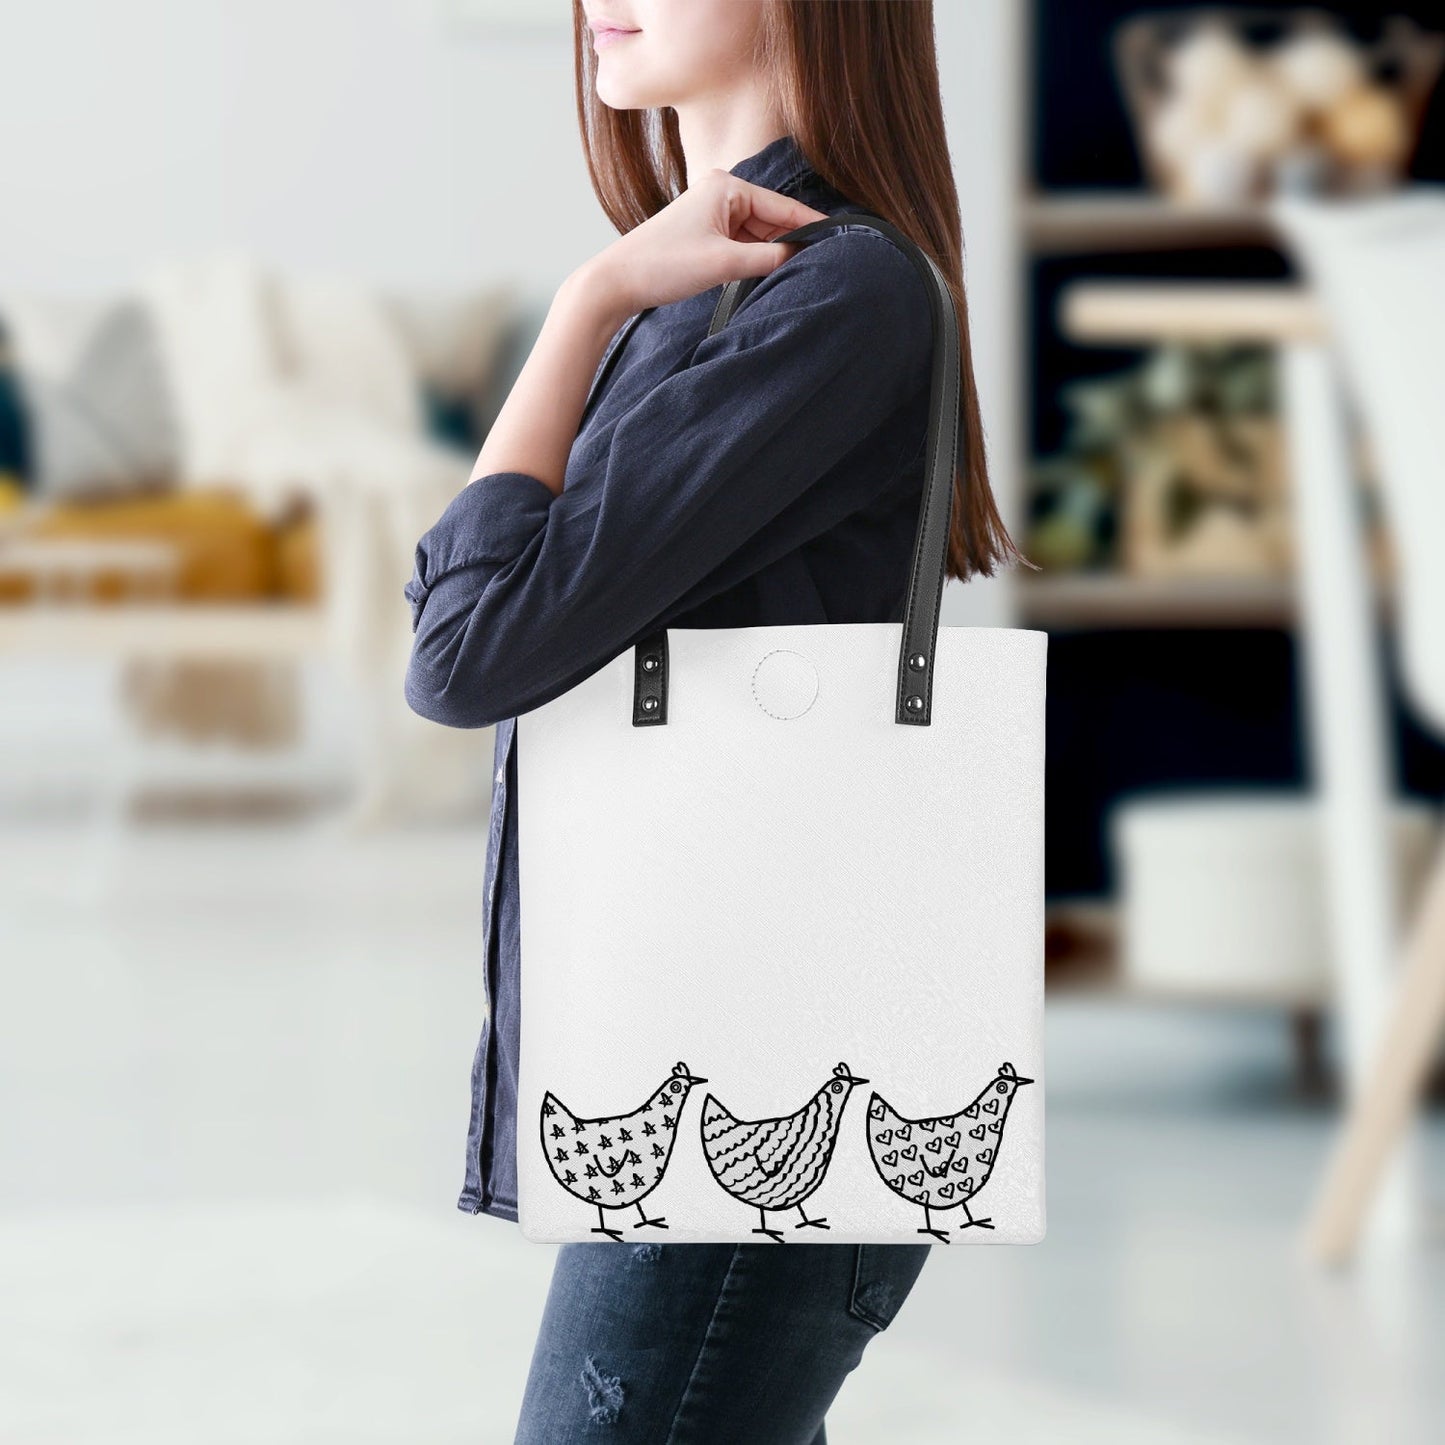 Chickens PU Leather Tote Bags